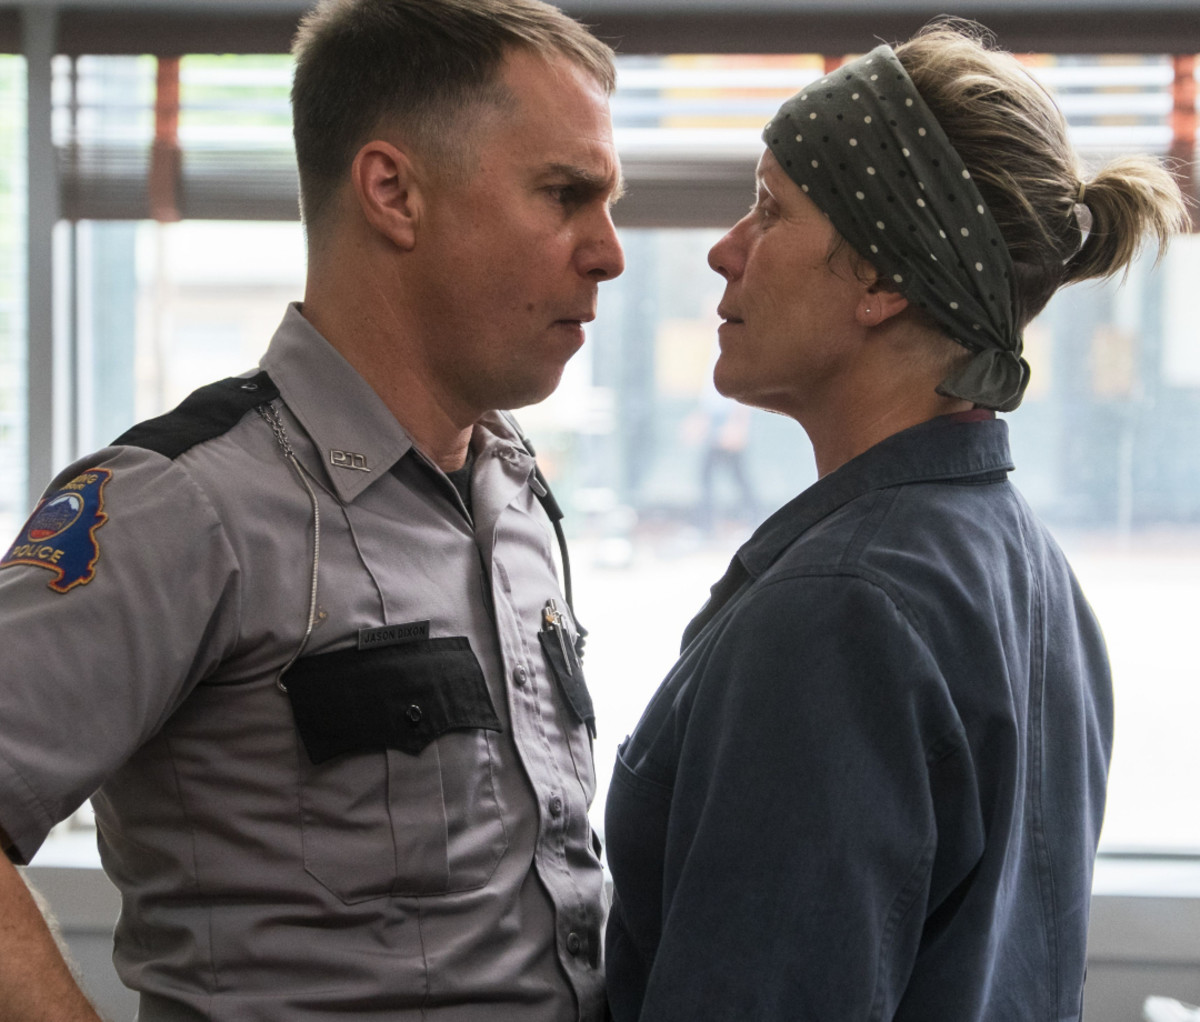 With Frances McDormand in "Three Billboards Outside Ebbing, Missouri."